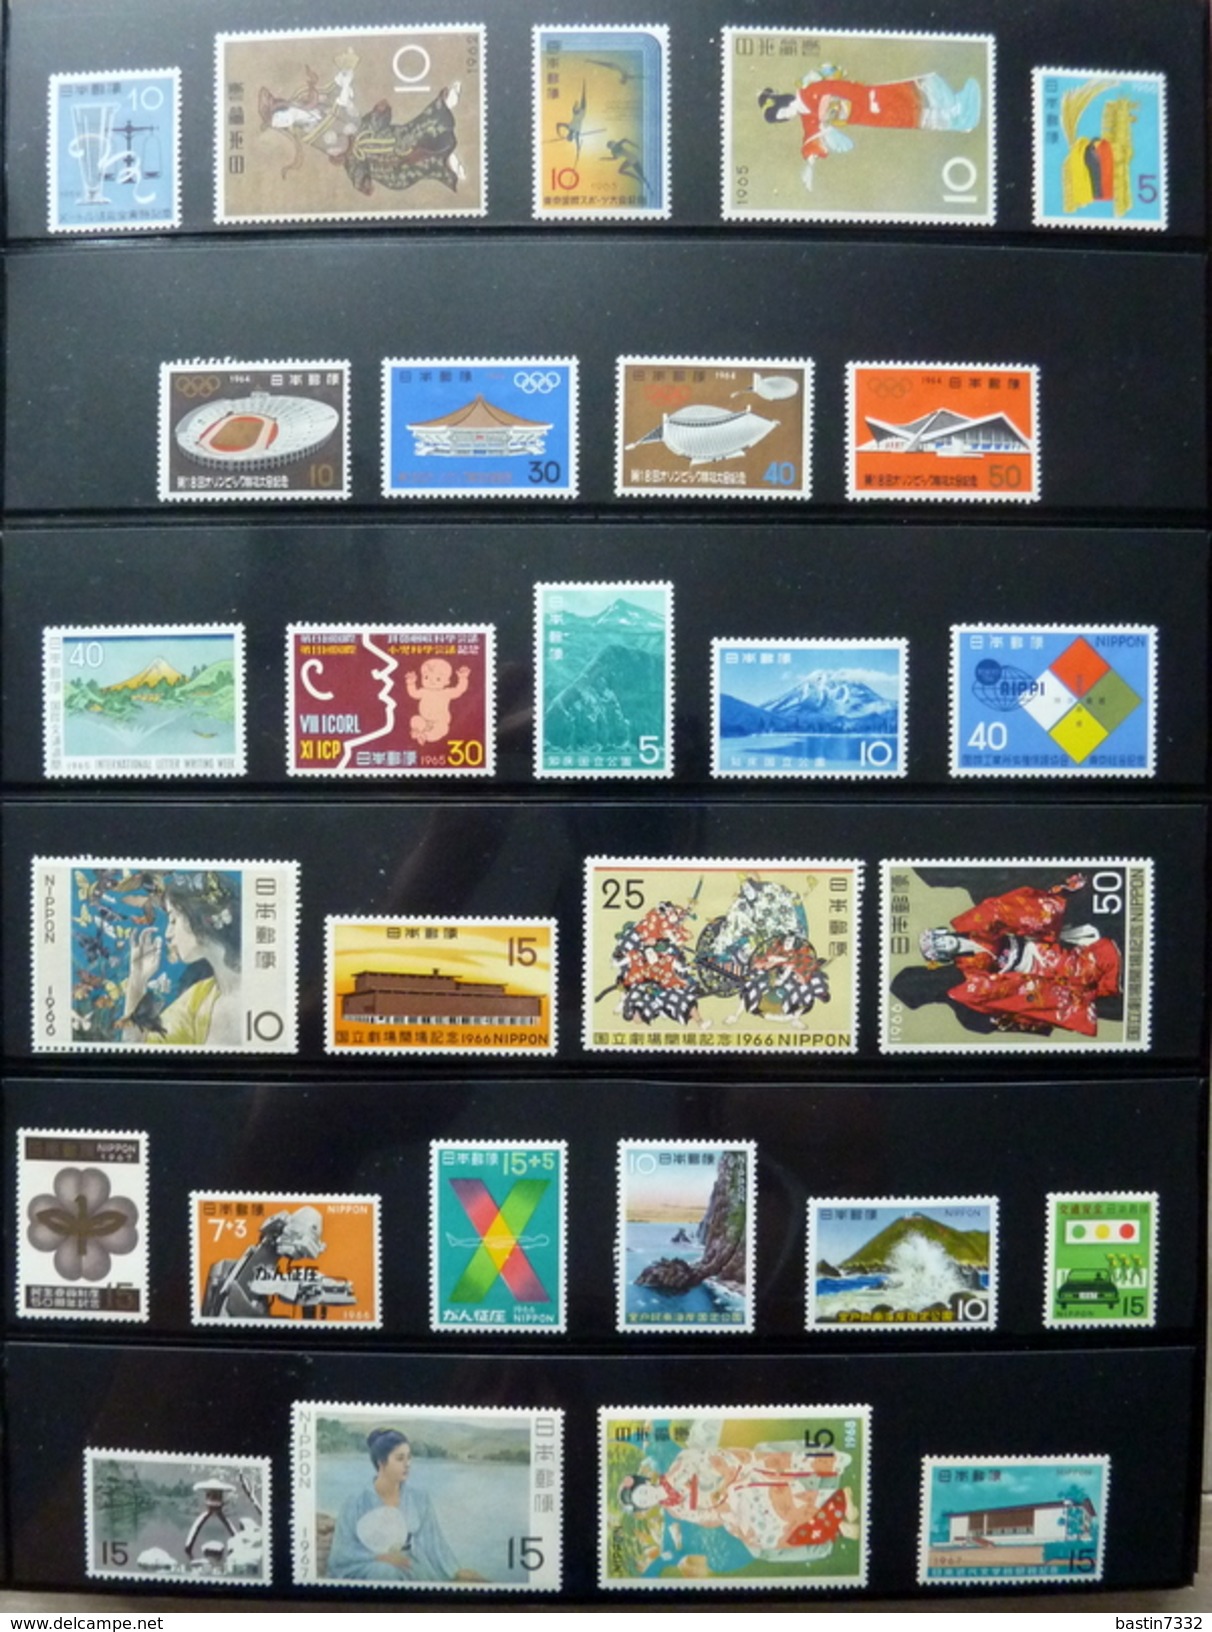 World collection incl. Asia in brandnew Importa album MNH/Postfris/Neuf sans charniere